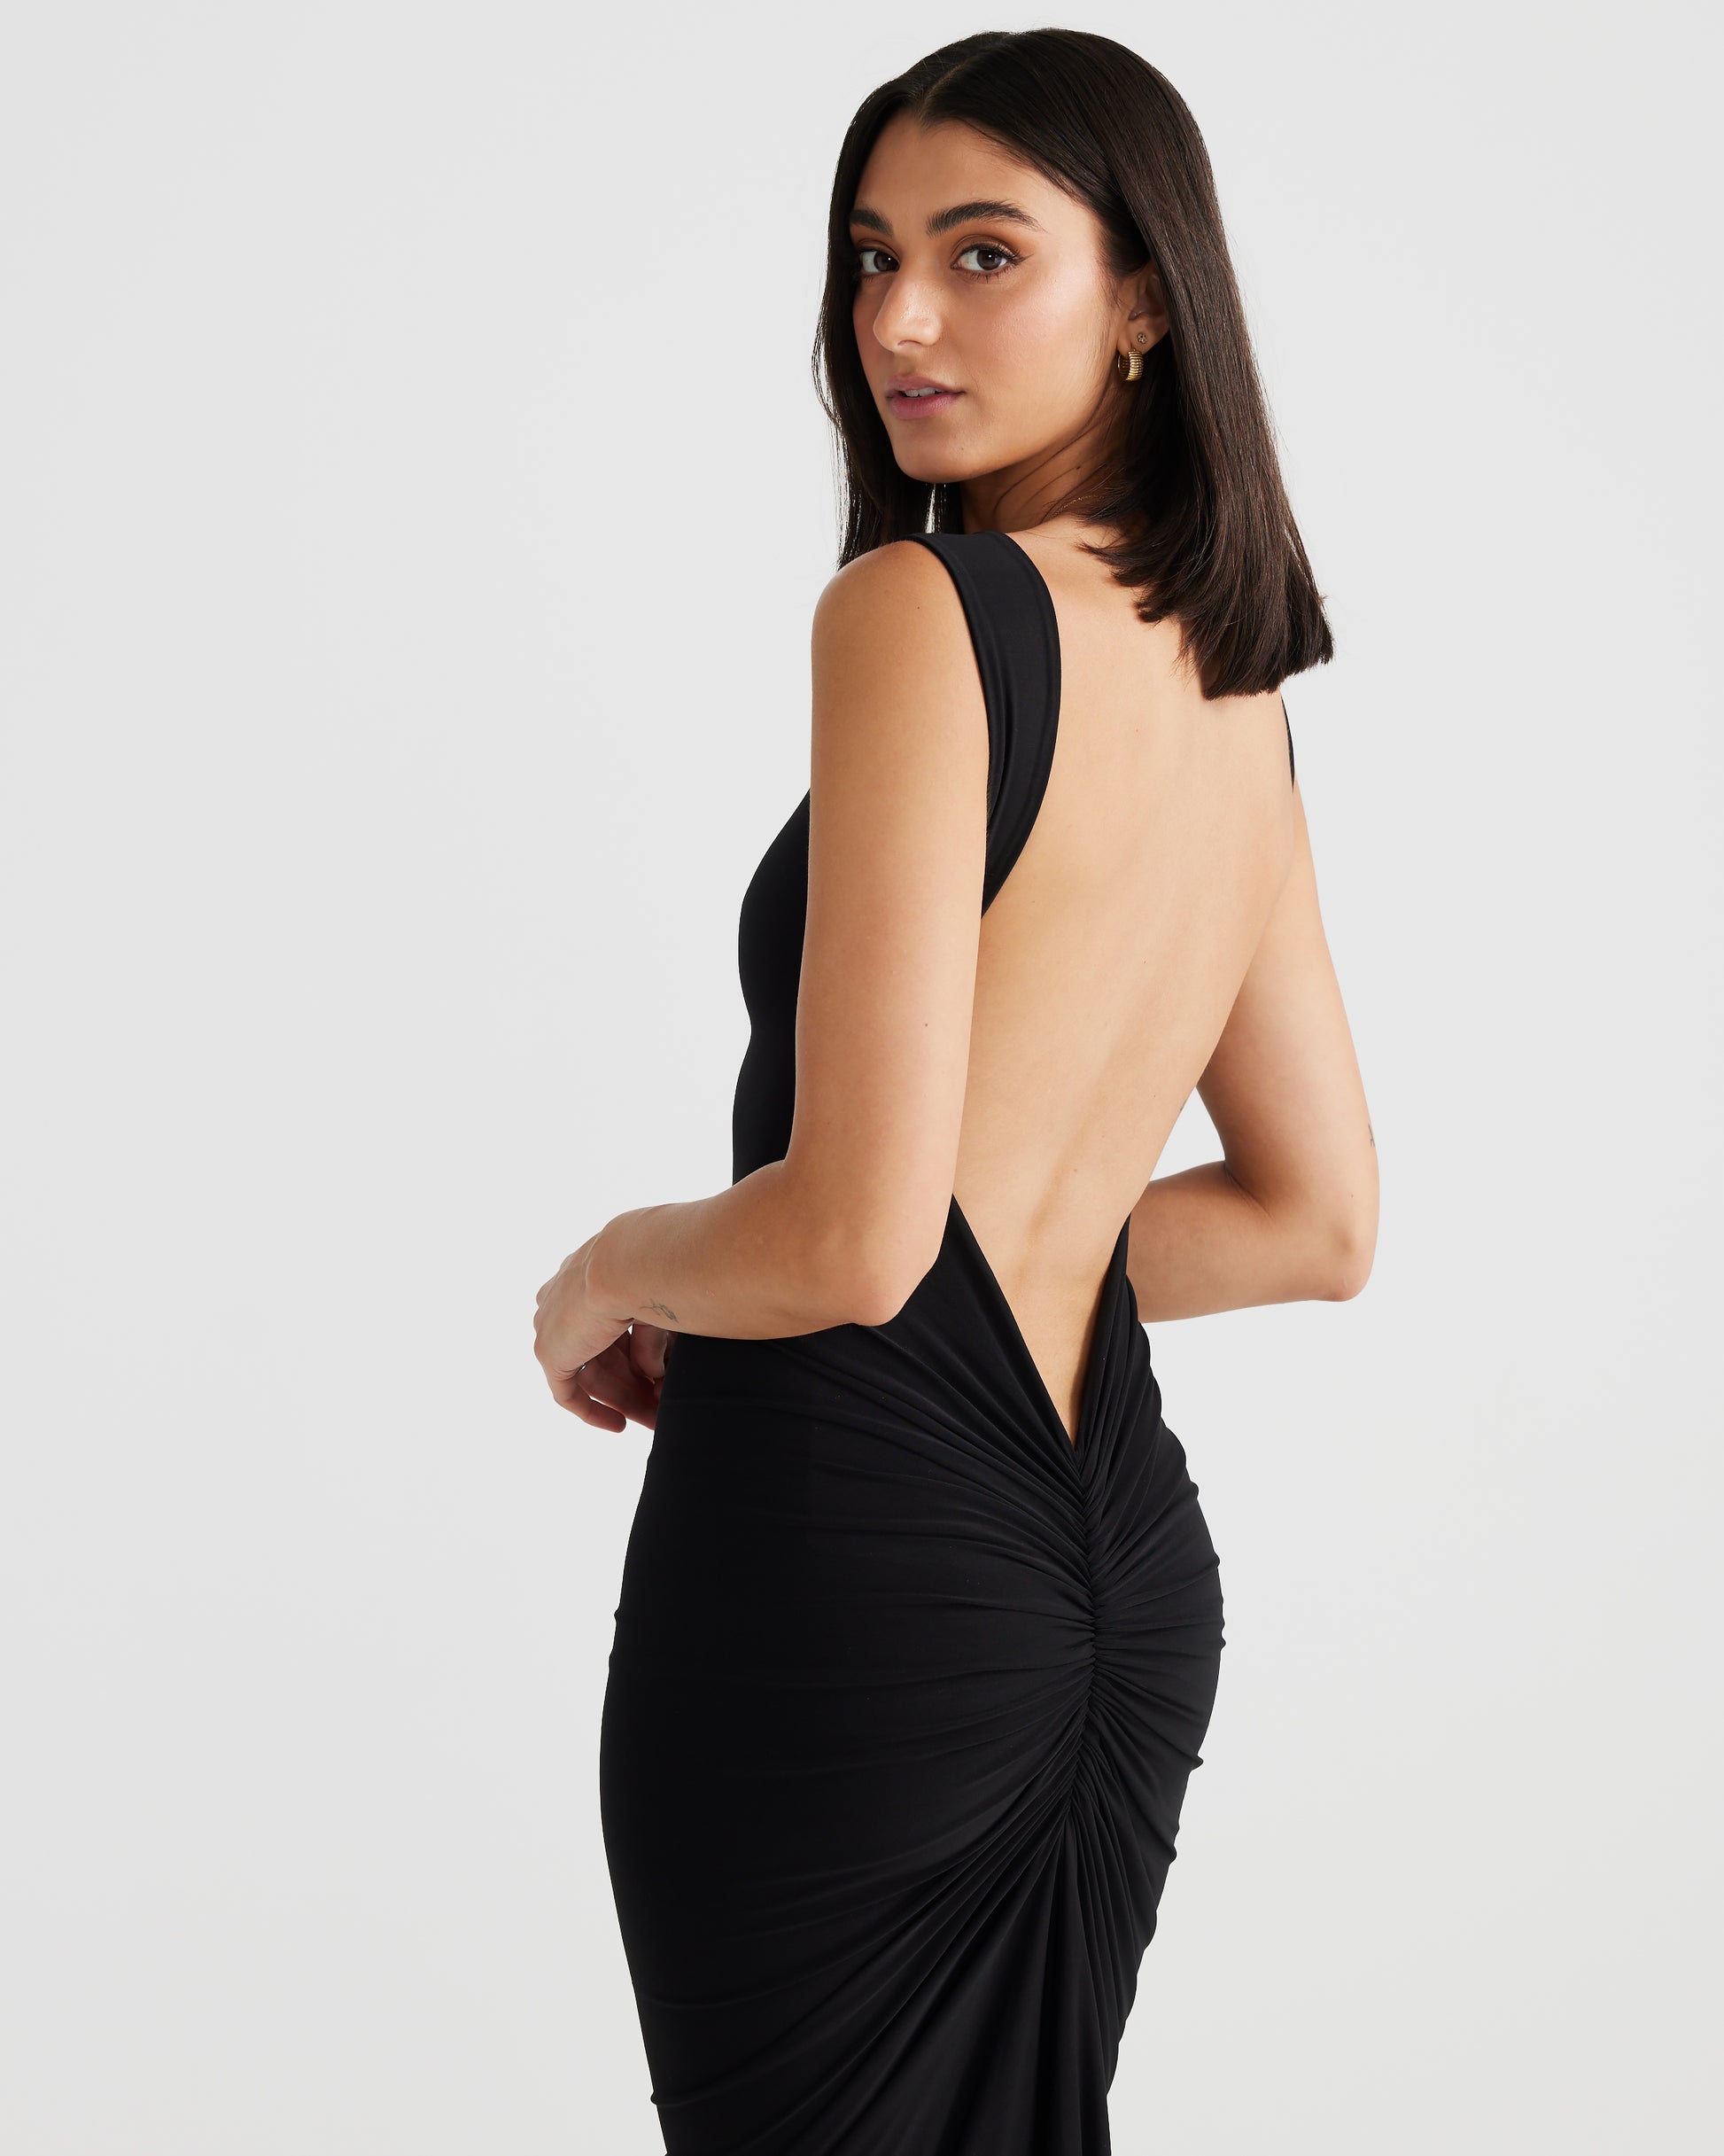 MÉLANI The Label SABIA Black Ruched Bum Backless Dress